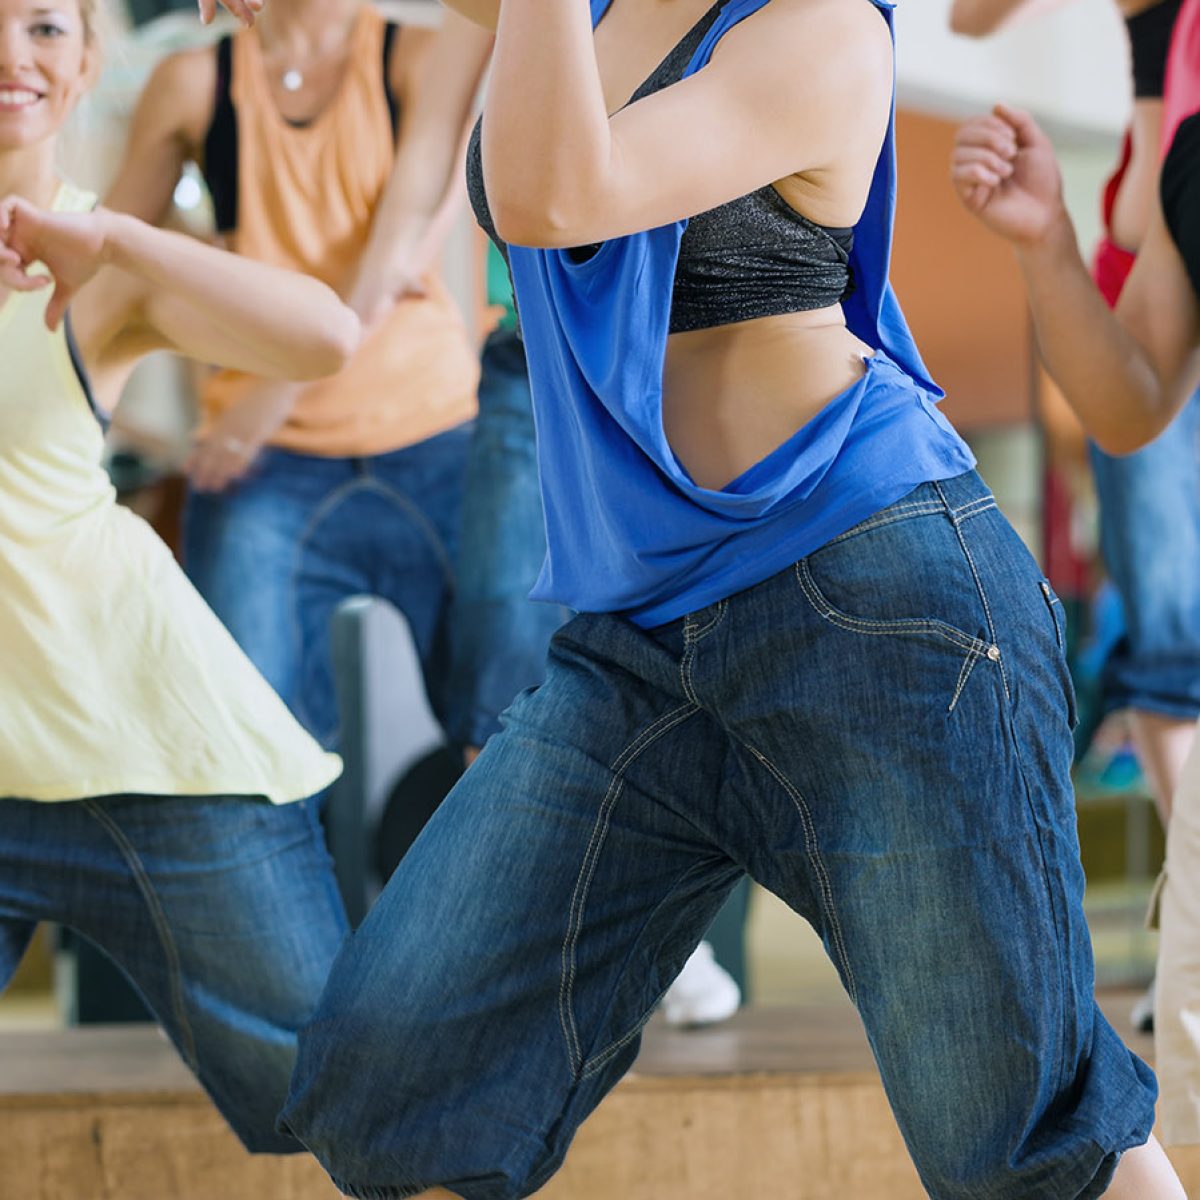 Jazzdance - young people dancing in a studio or gym doing sports or practicing a dance number